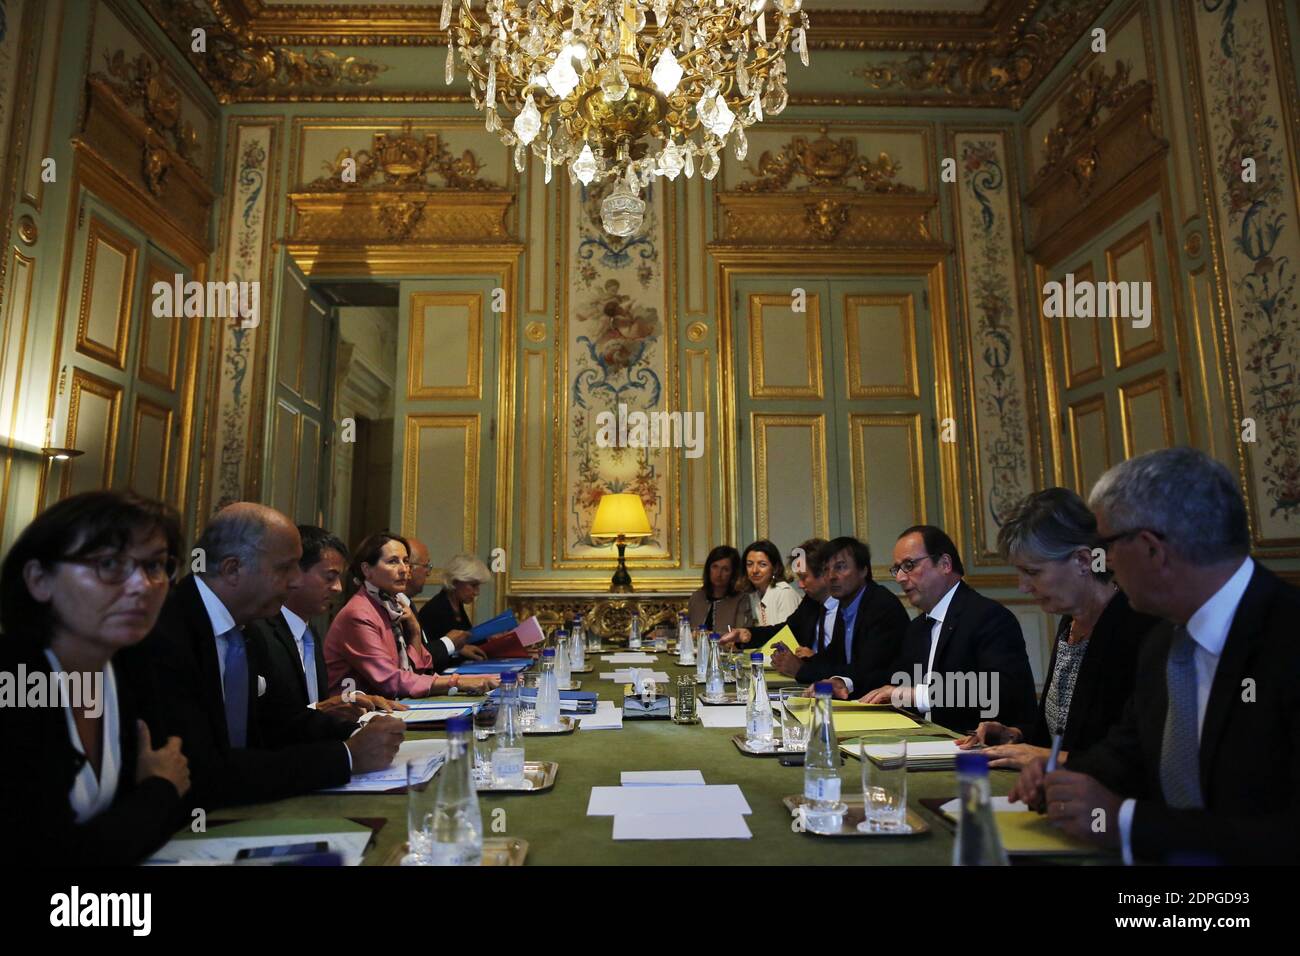 French President Francois Hollande (3rd L) presides over a ministerial meeting including Prime Minister Manuel Valls (3rd L), Minister of Ecology, Sustainable Development and Energy Segolene Royal (4th L), Minister of Foreign Affairs and International Development Laurent Fabius (2nd L), environmental activist and President Hollande's special envoy for the protection of the planet Nicolas Hulot (4th R), COP21 special representative Laurence Tubiana (2nd R) and Deputy Secretary General of the French Presidency Boris Vallaud (5th R), in preparation for the COP21 Climate Conference to be held in P Stock Photo